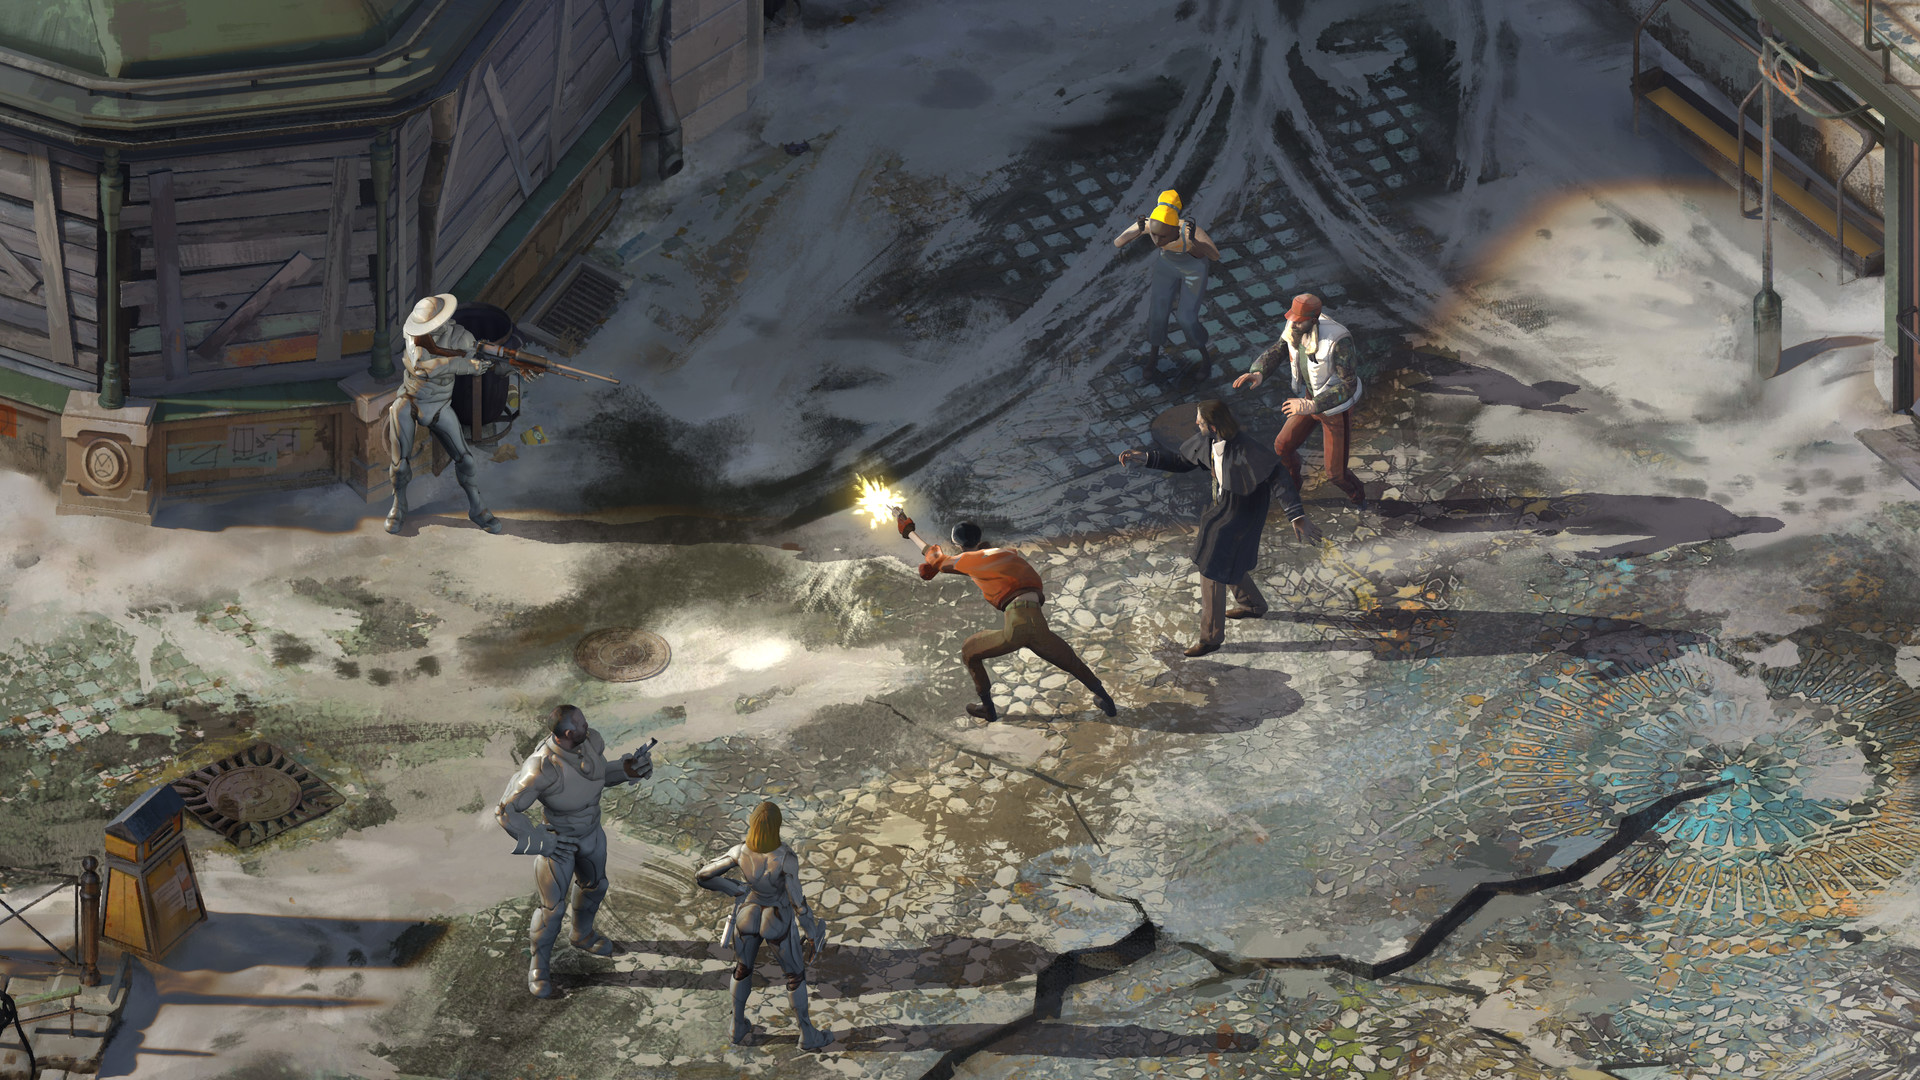 Save 75% on Disco Elysium - The Final Cut on Steam